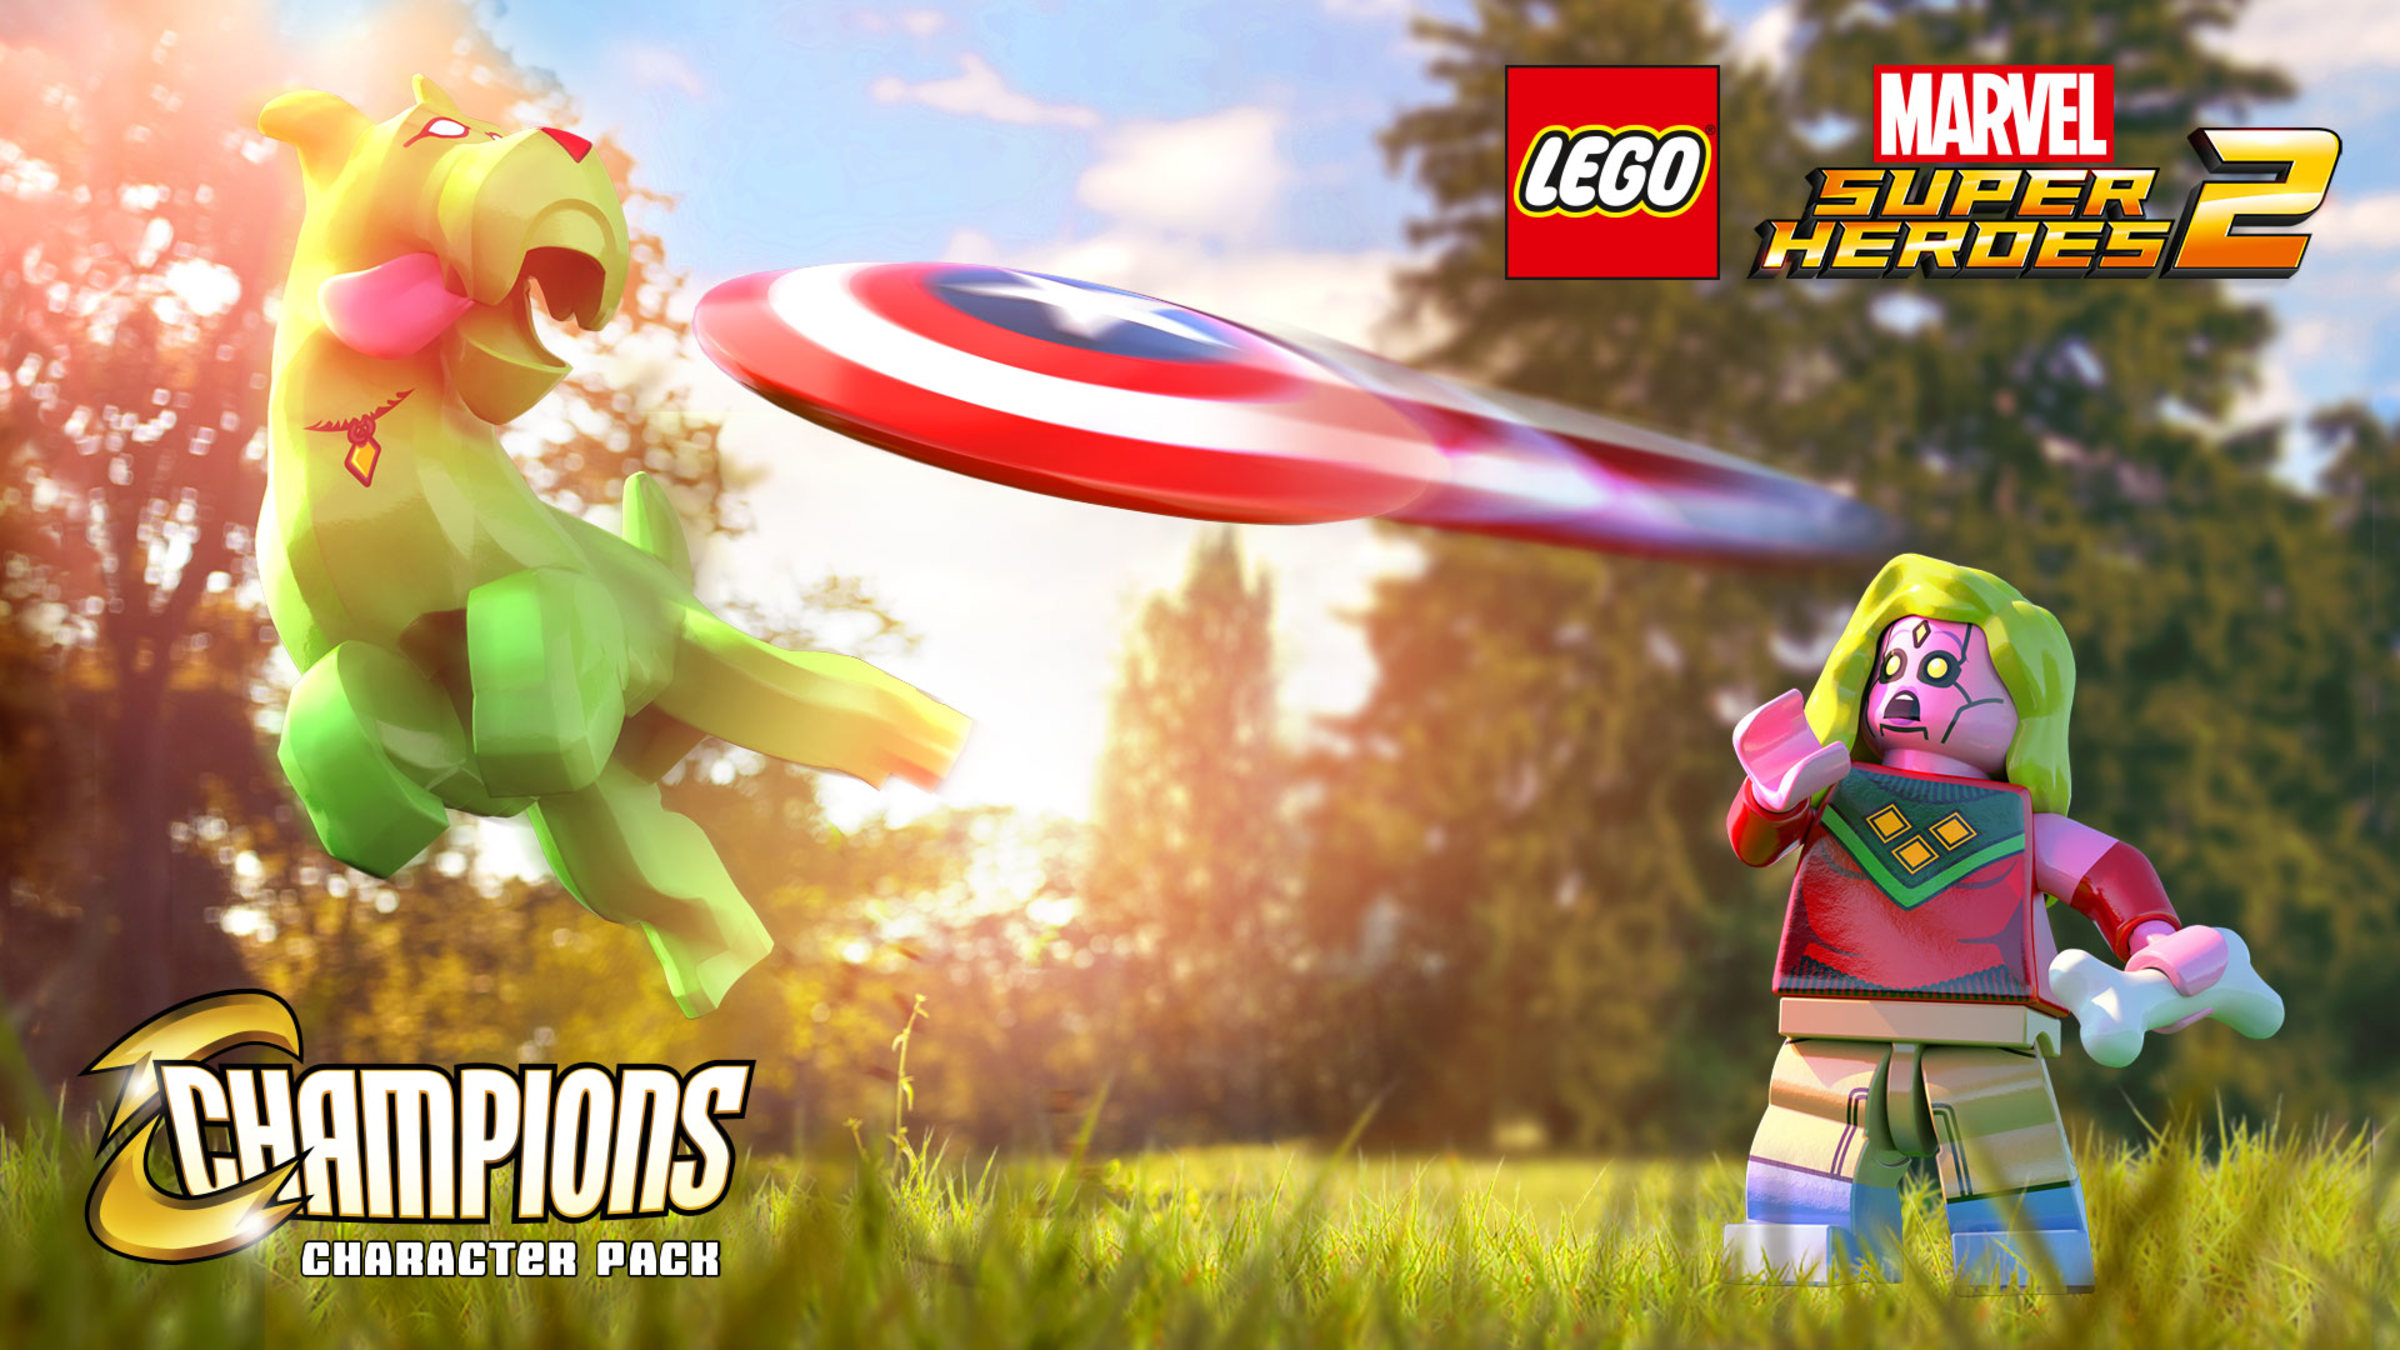 LEGO® Marvel™ Super Heroes for Nintendo Switch - Nintendo Official